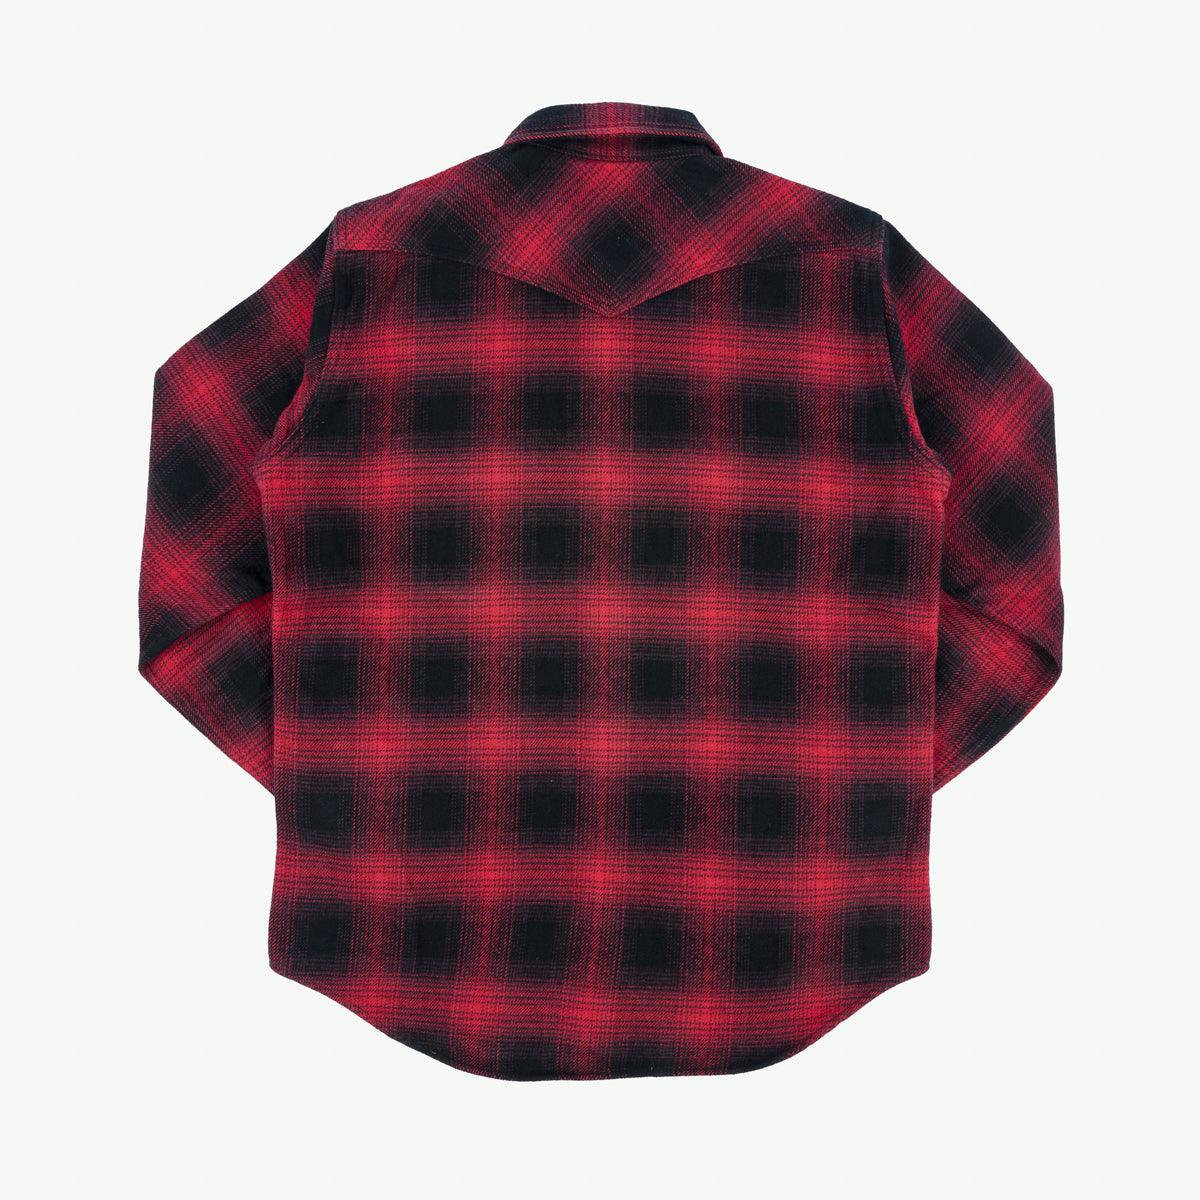 Image showing the IHSH-264-RED - Ultra Heavy Flannel Ombré Check Western Shirt - Red/Black which is a Shirts described by the following info Iron Heart, New, Released, Shirts, Tops and sold on the IRON HEART GERMANY online store